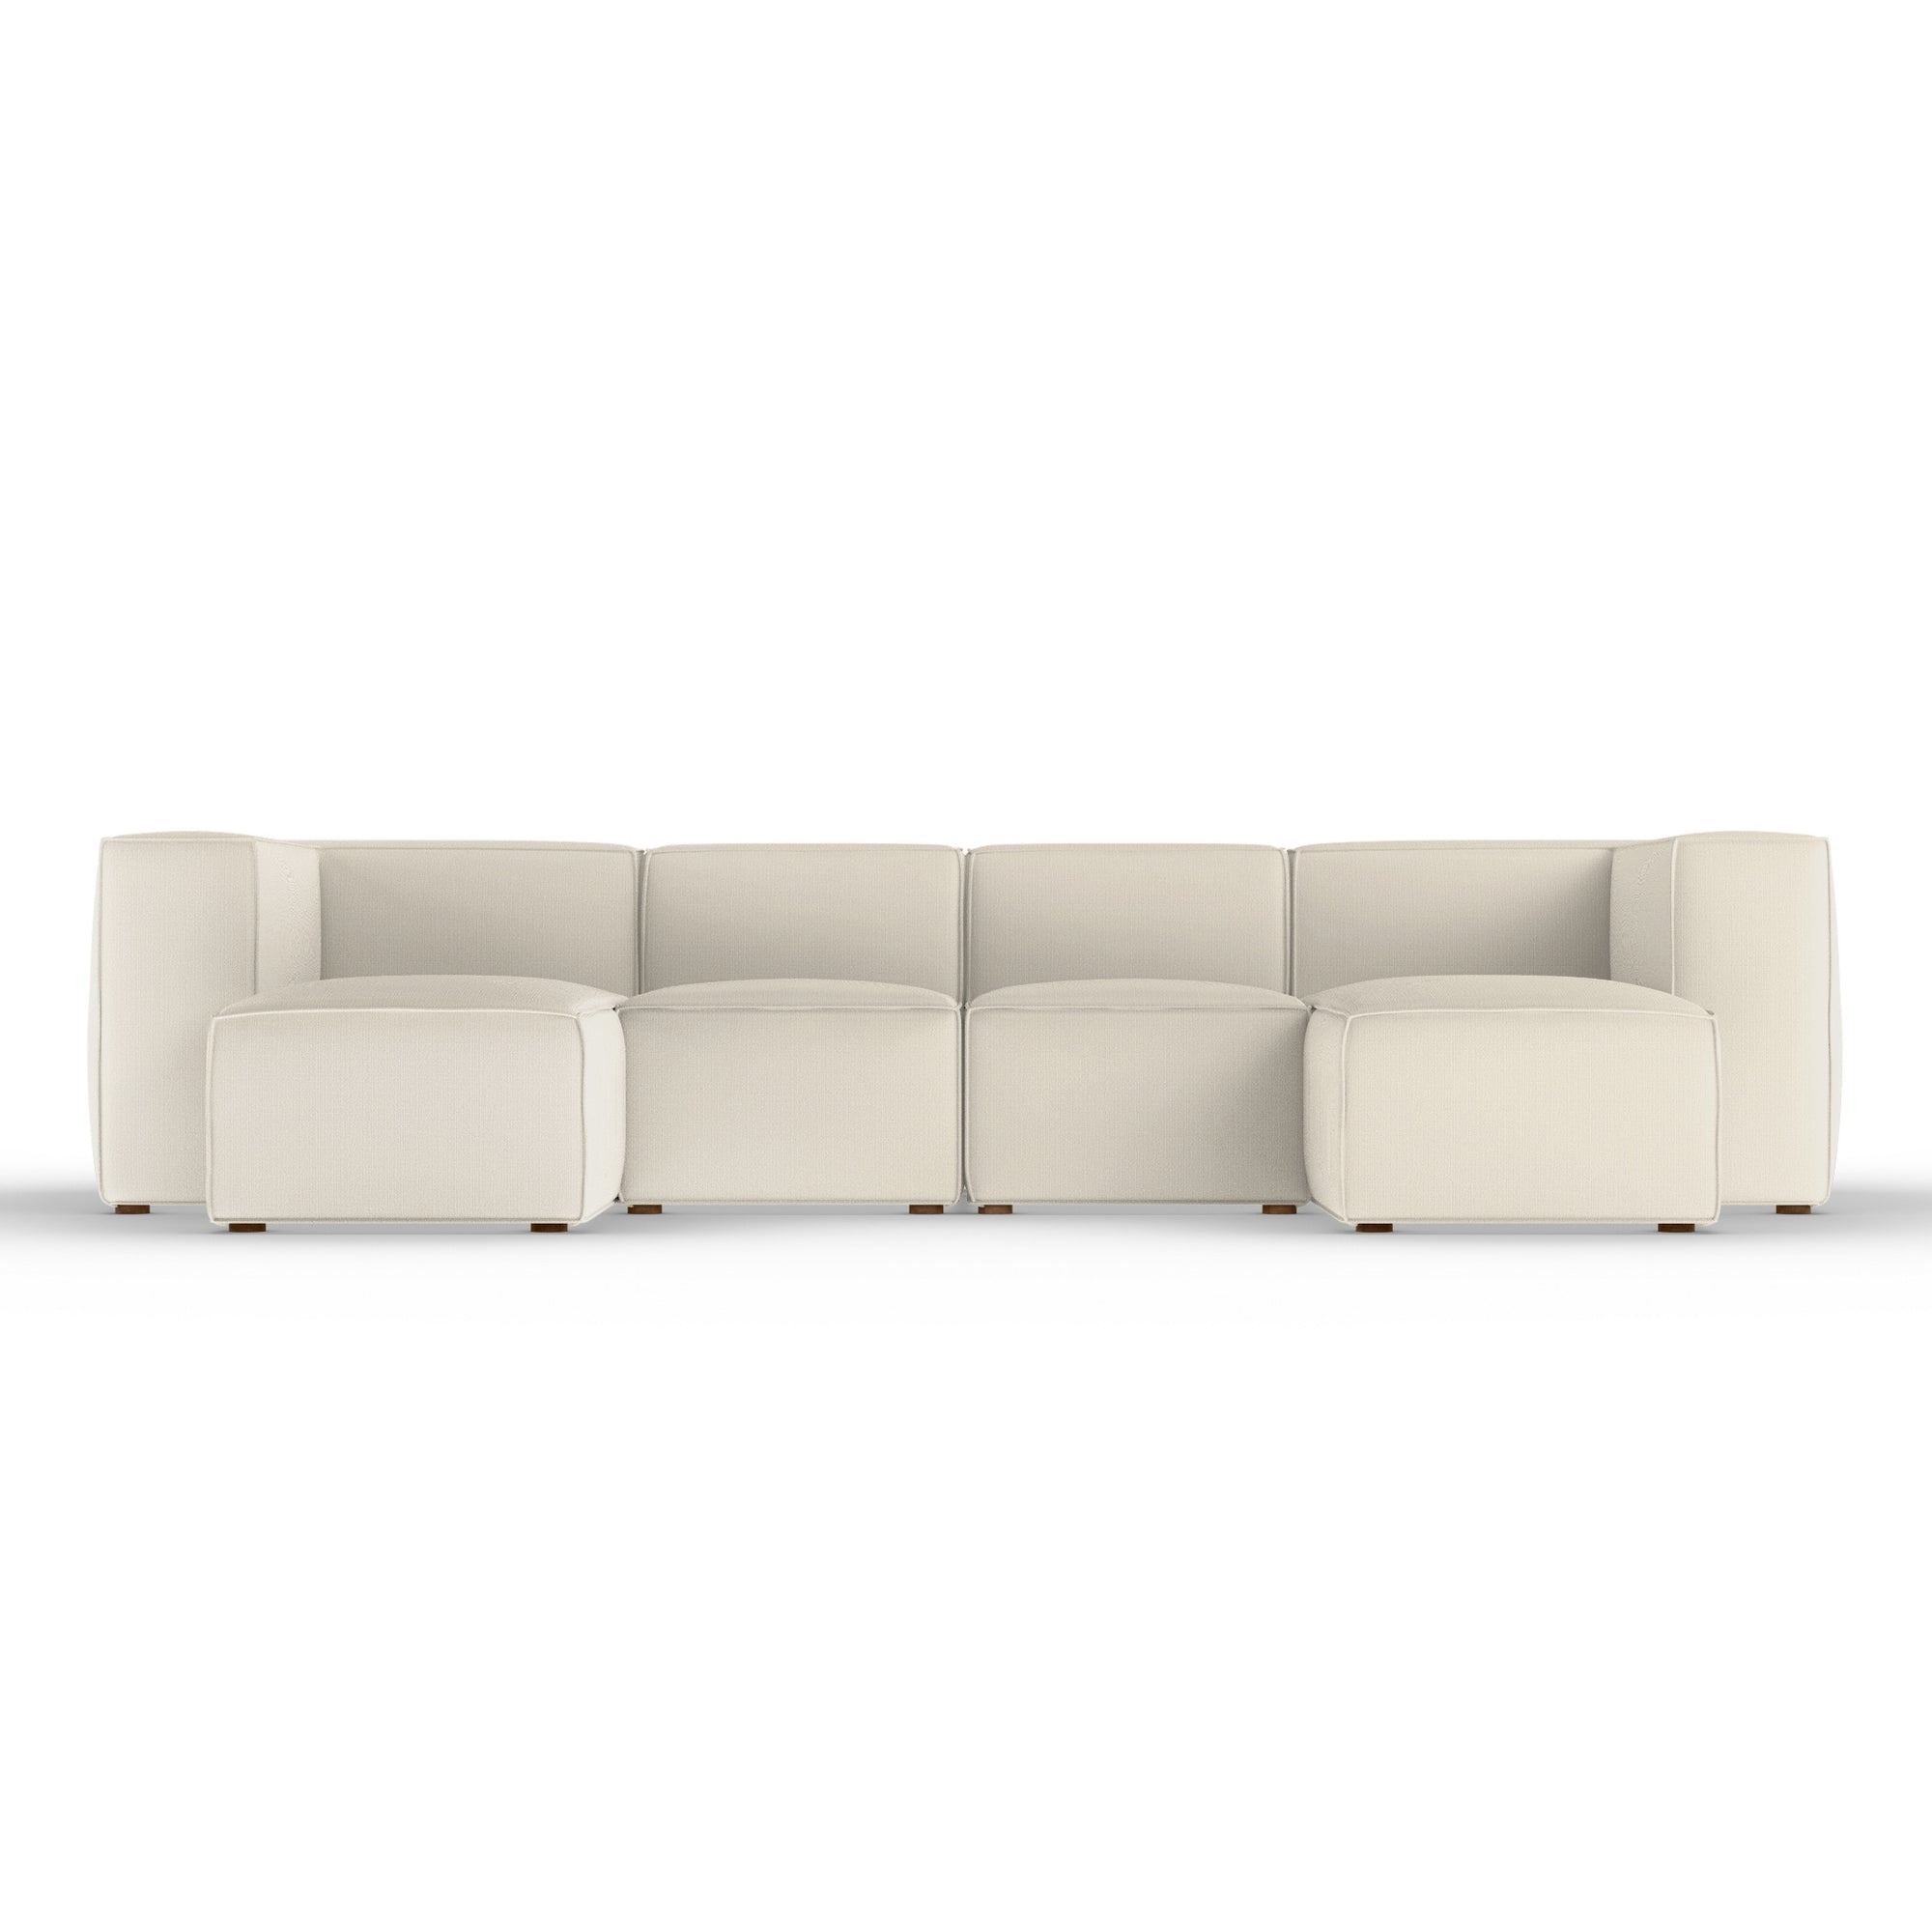 Varick U-Chaise Sectional - Oyster Box Weave Linen